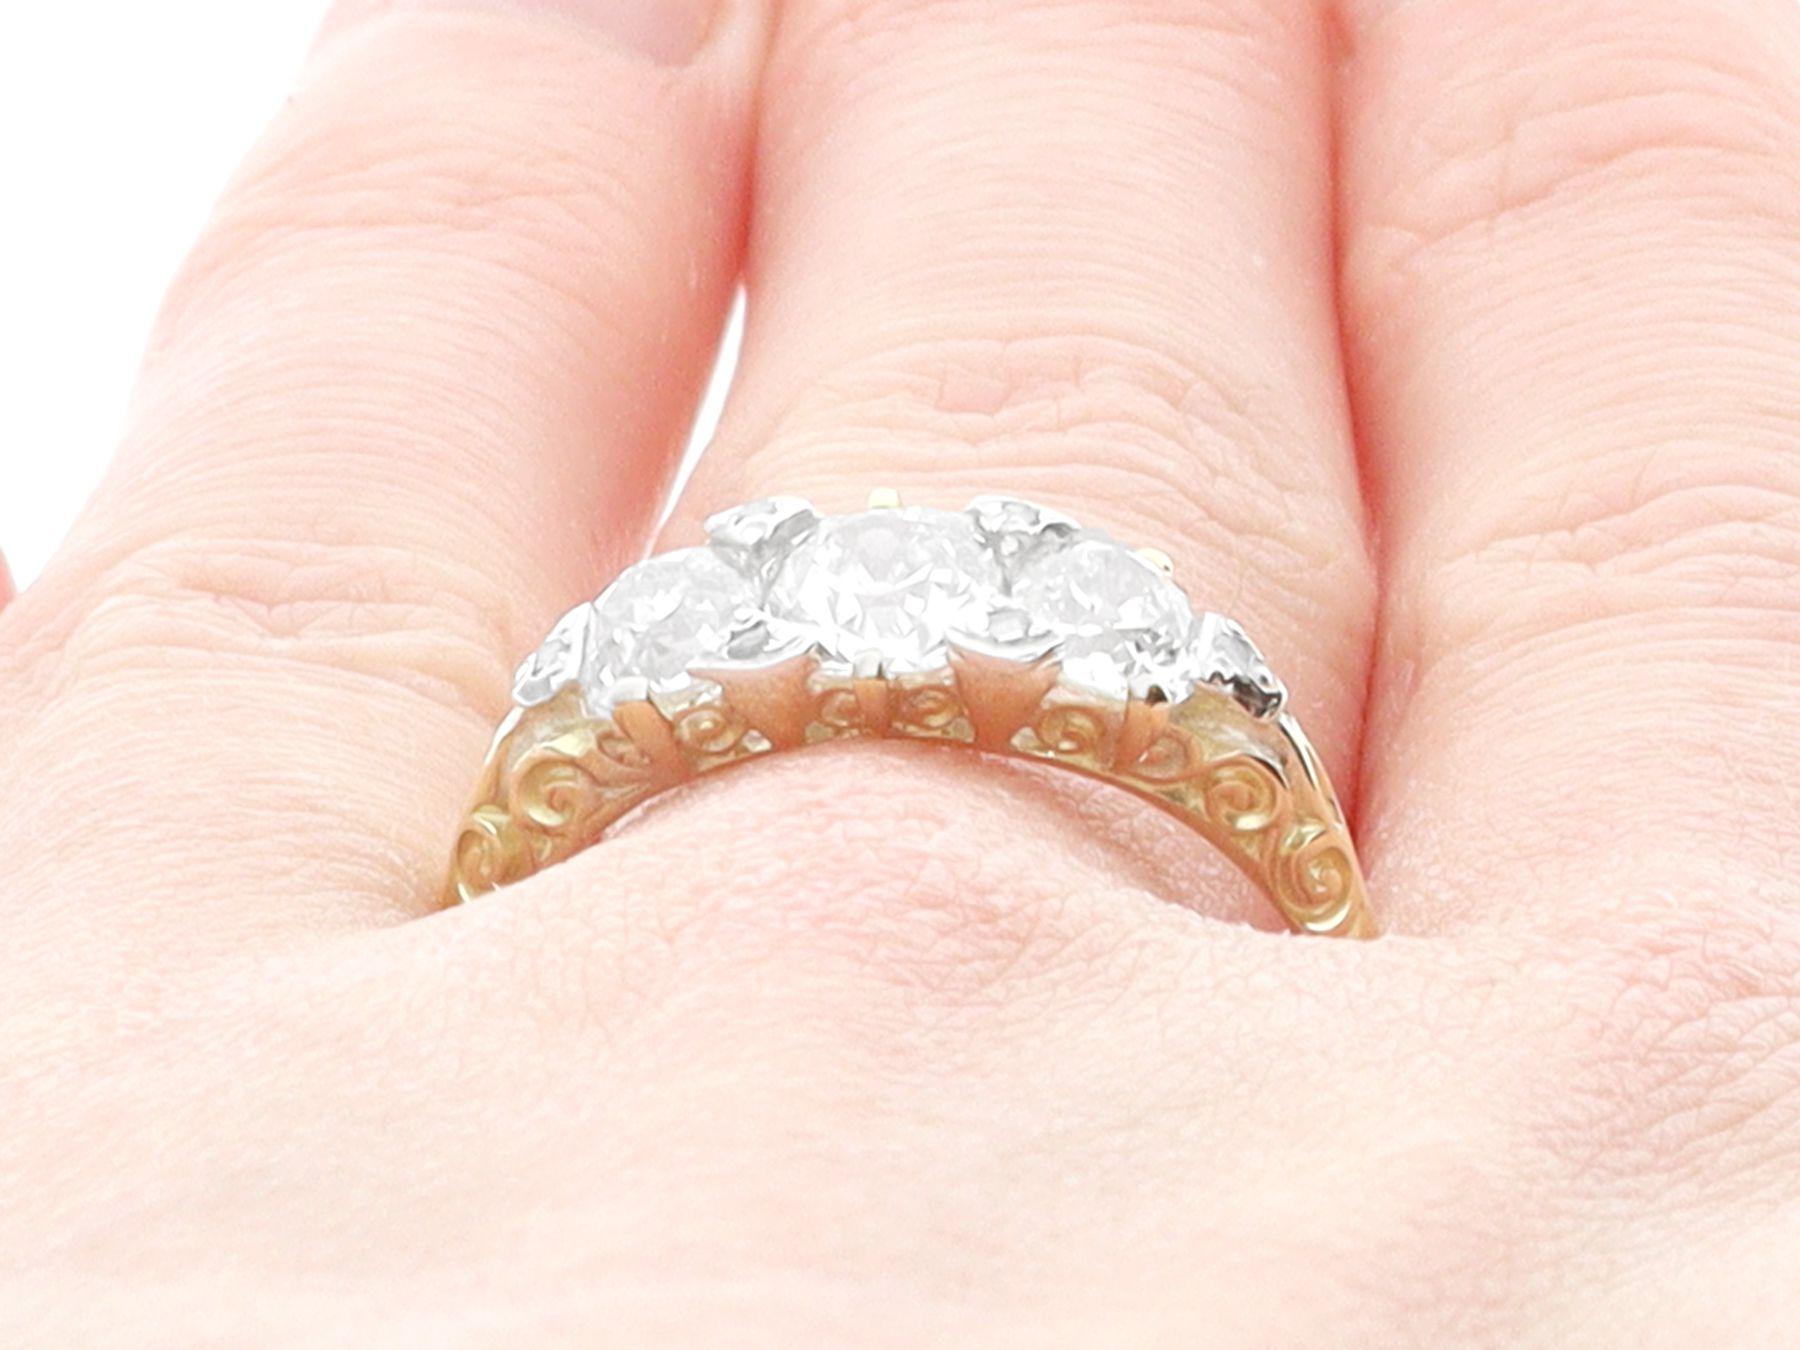 Antique 2.23 Carat Diamond and 18k Yellow Gold Trilogy Ring, circa 1900 For Sale 3